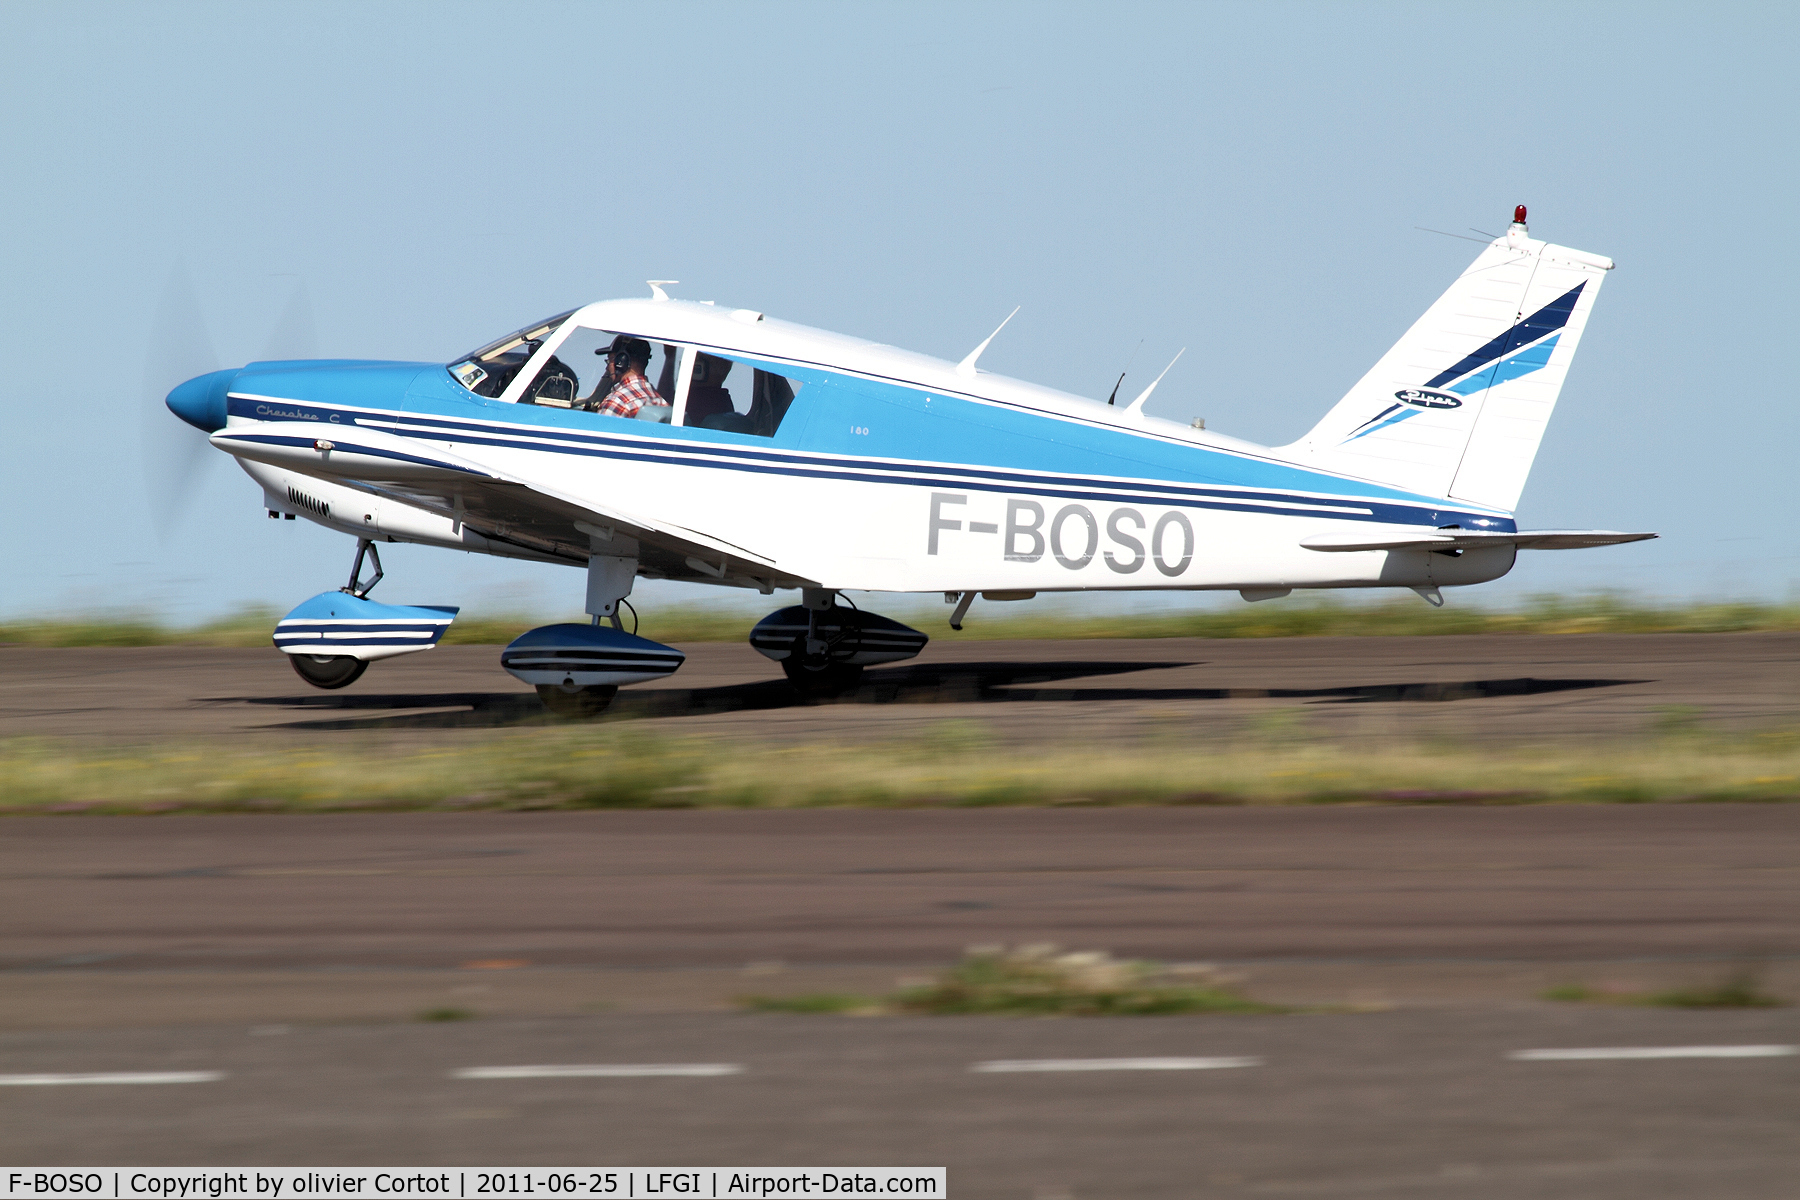 F-BOSO, 1967 Piper PA-28-180 Cherokee C C/N 283931, Taking off from Darois airport